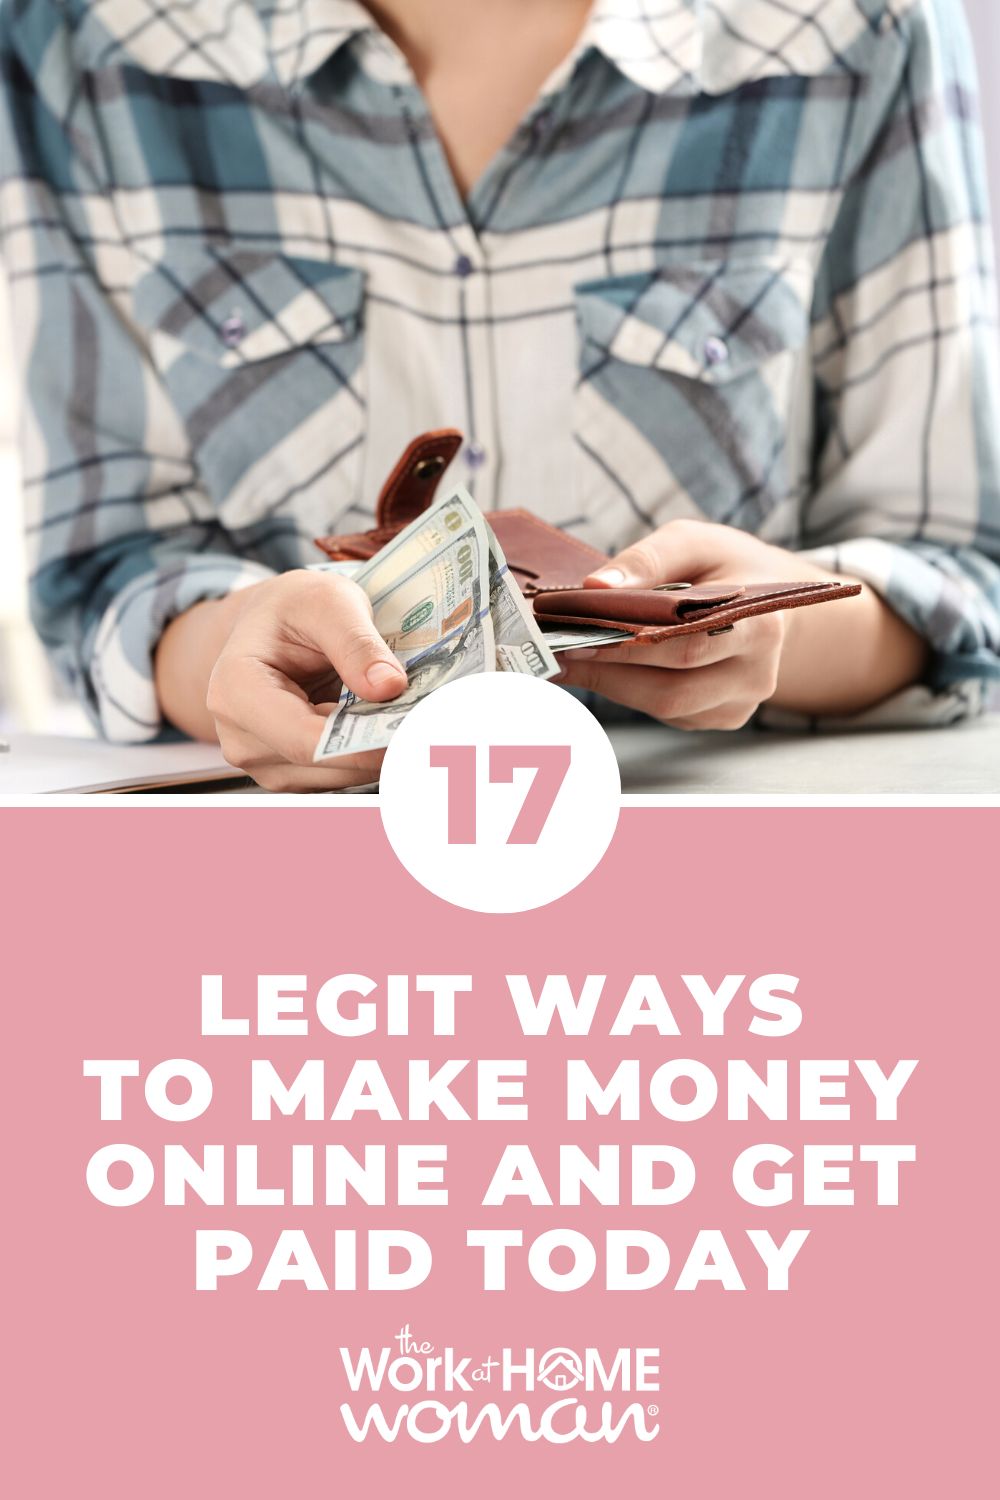 Whether you have an unexpected expense or you just need money FAST, these 17 legit ways to make money online will help you get paid today! #money #fast #online